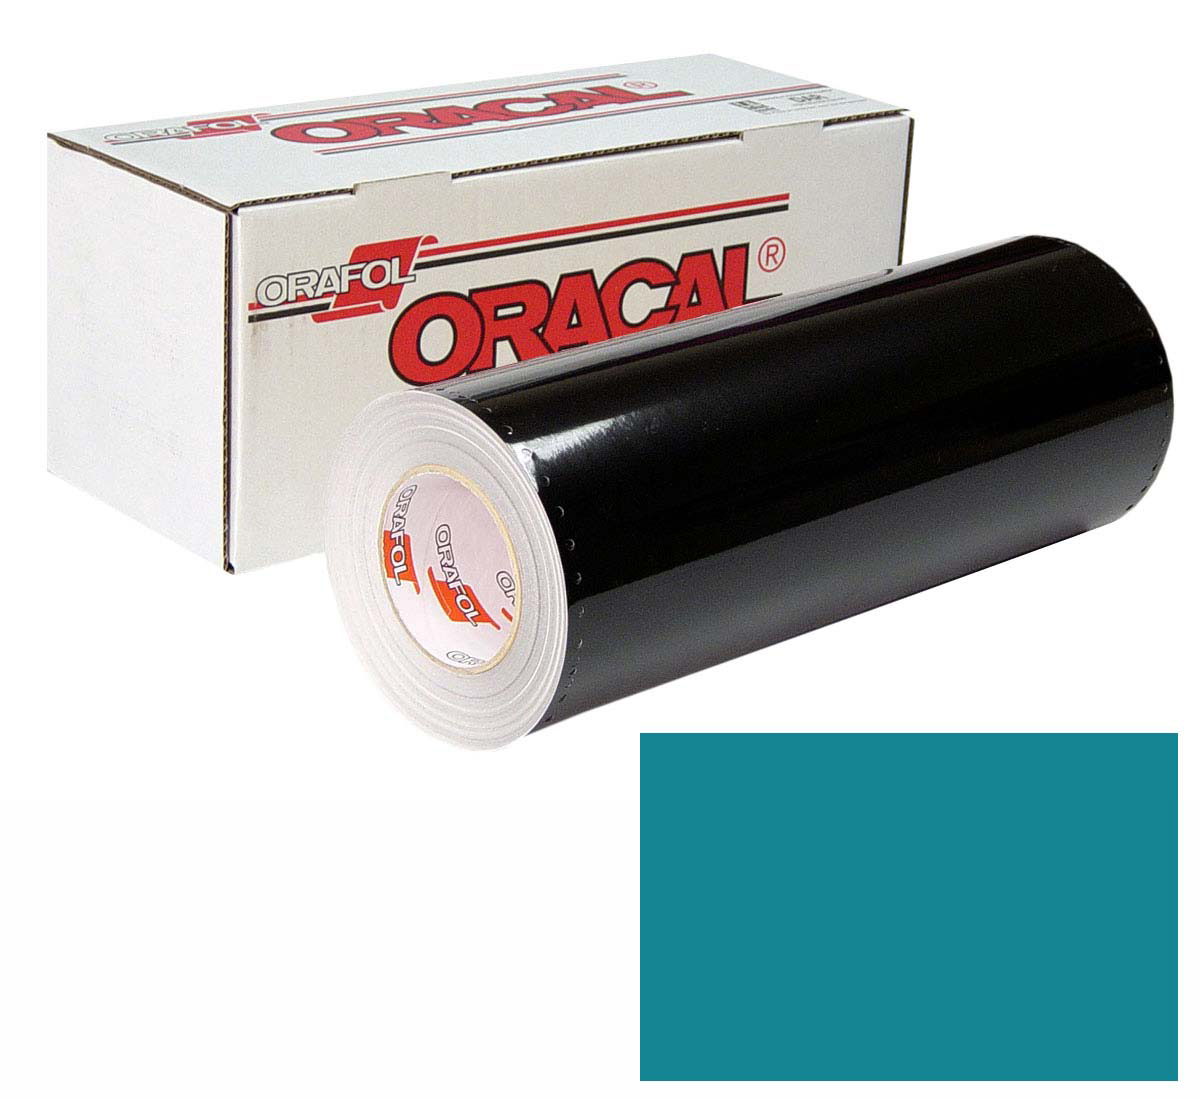 ORACAL 641 Unp 24in X 50yd 066 Turquoise Blue